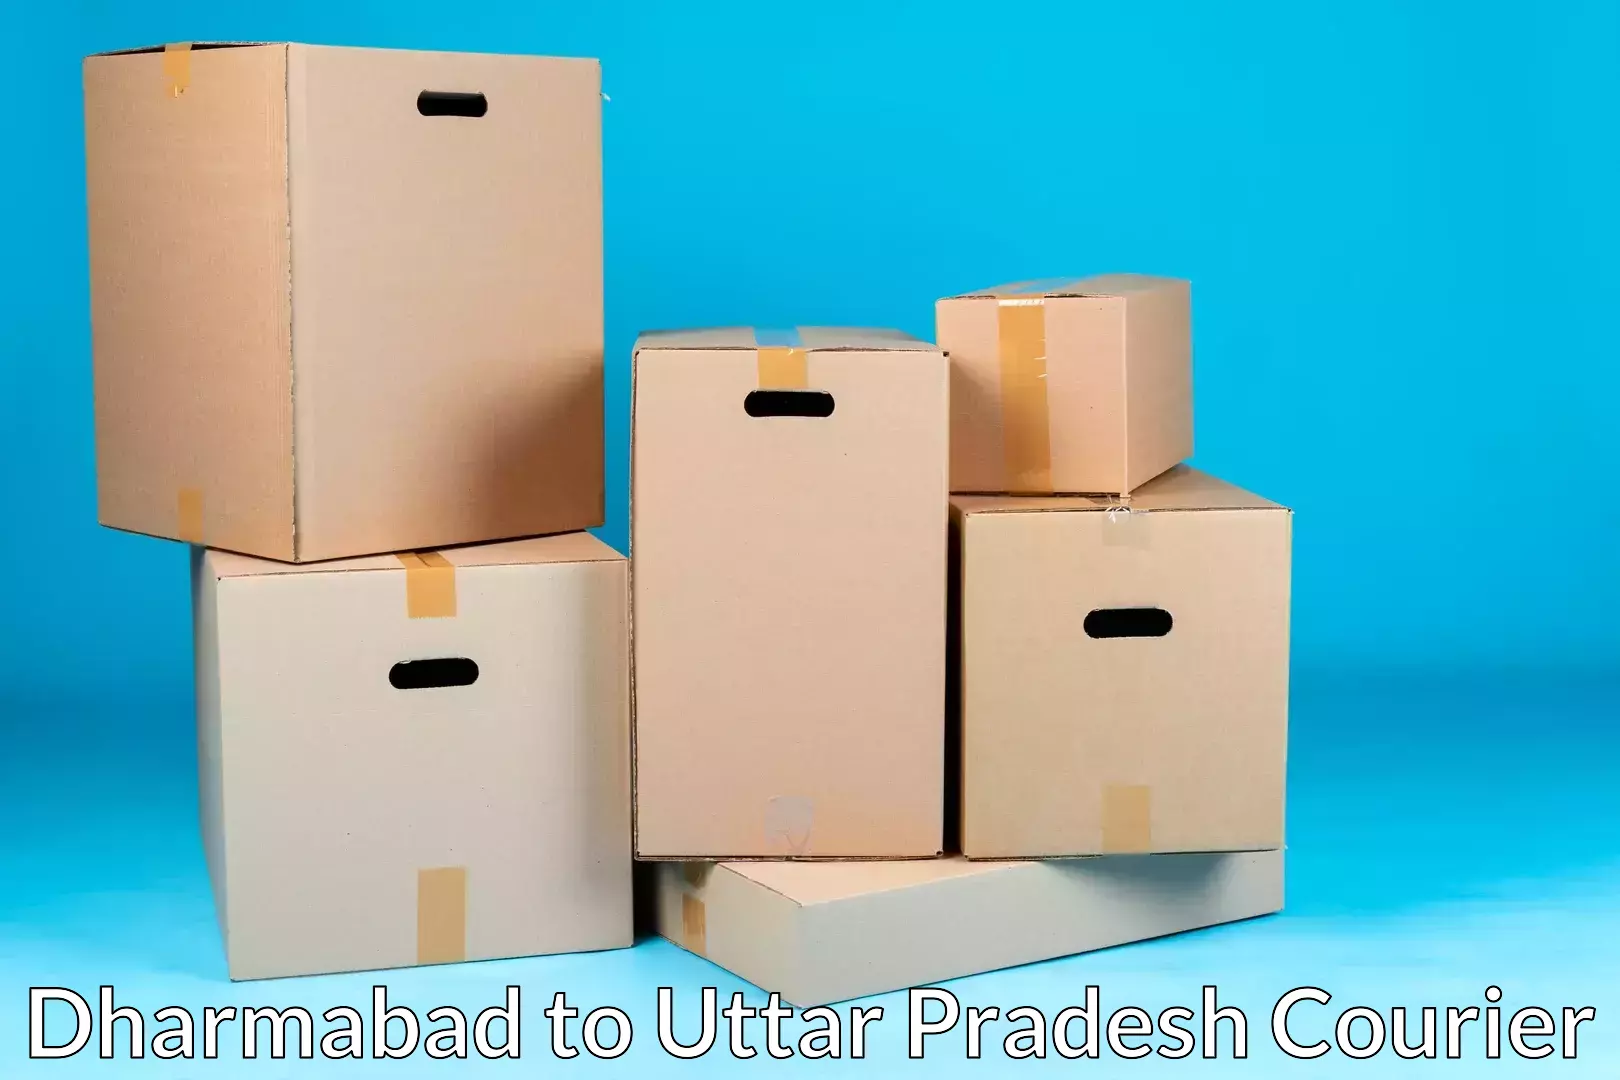 Furniture moving experts Dharmabad to Lucknow